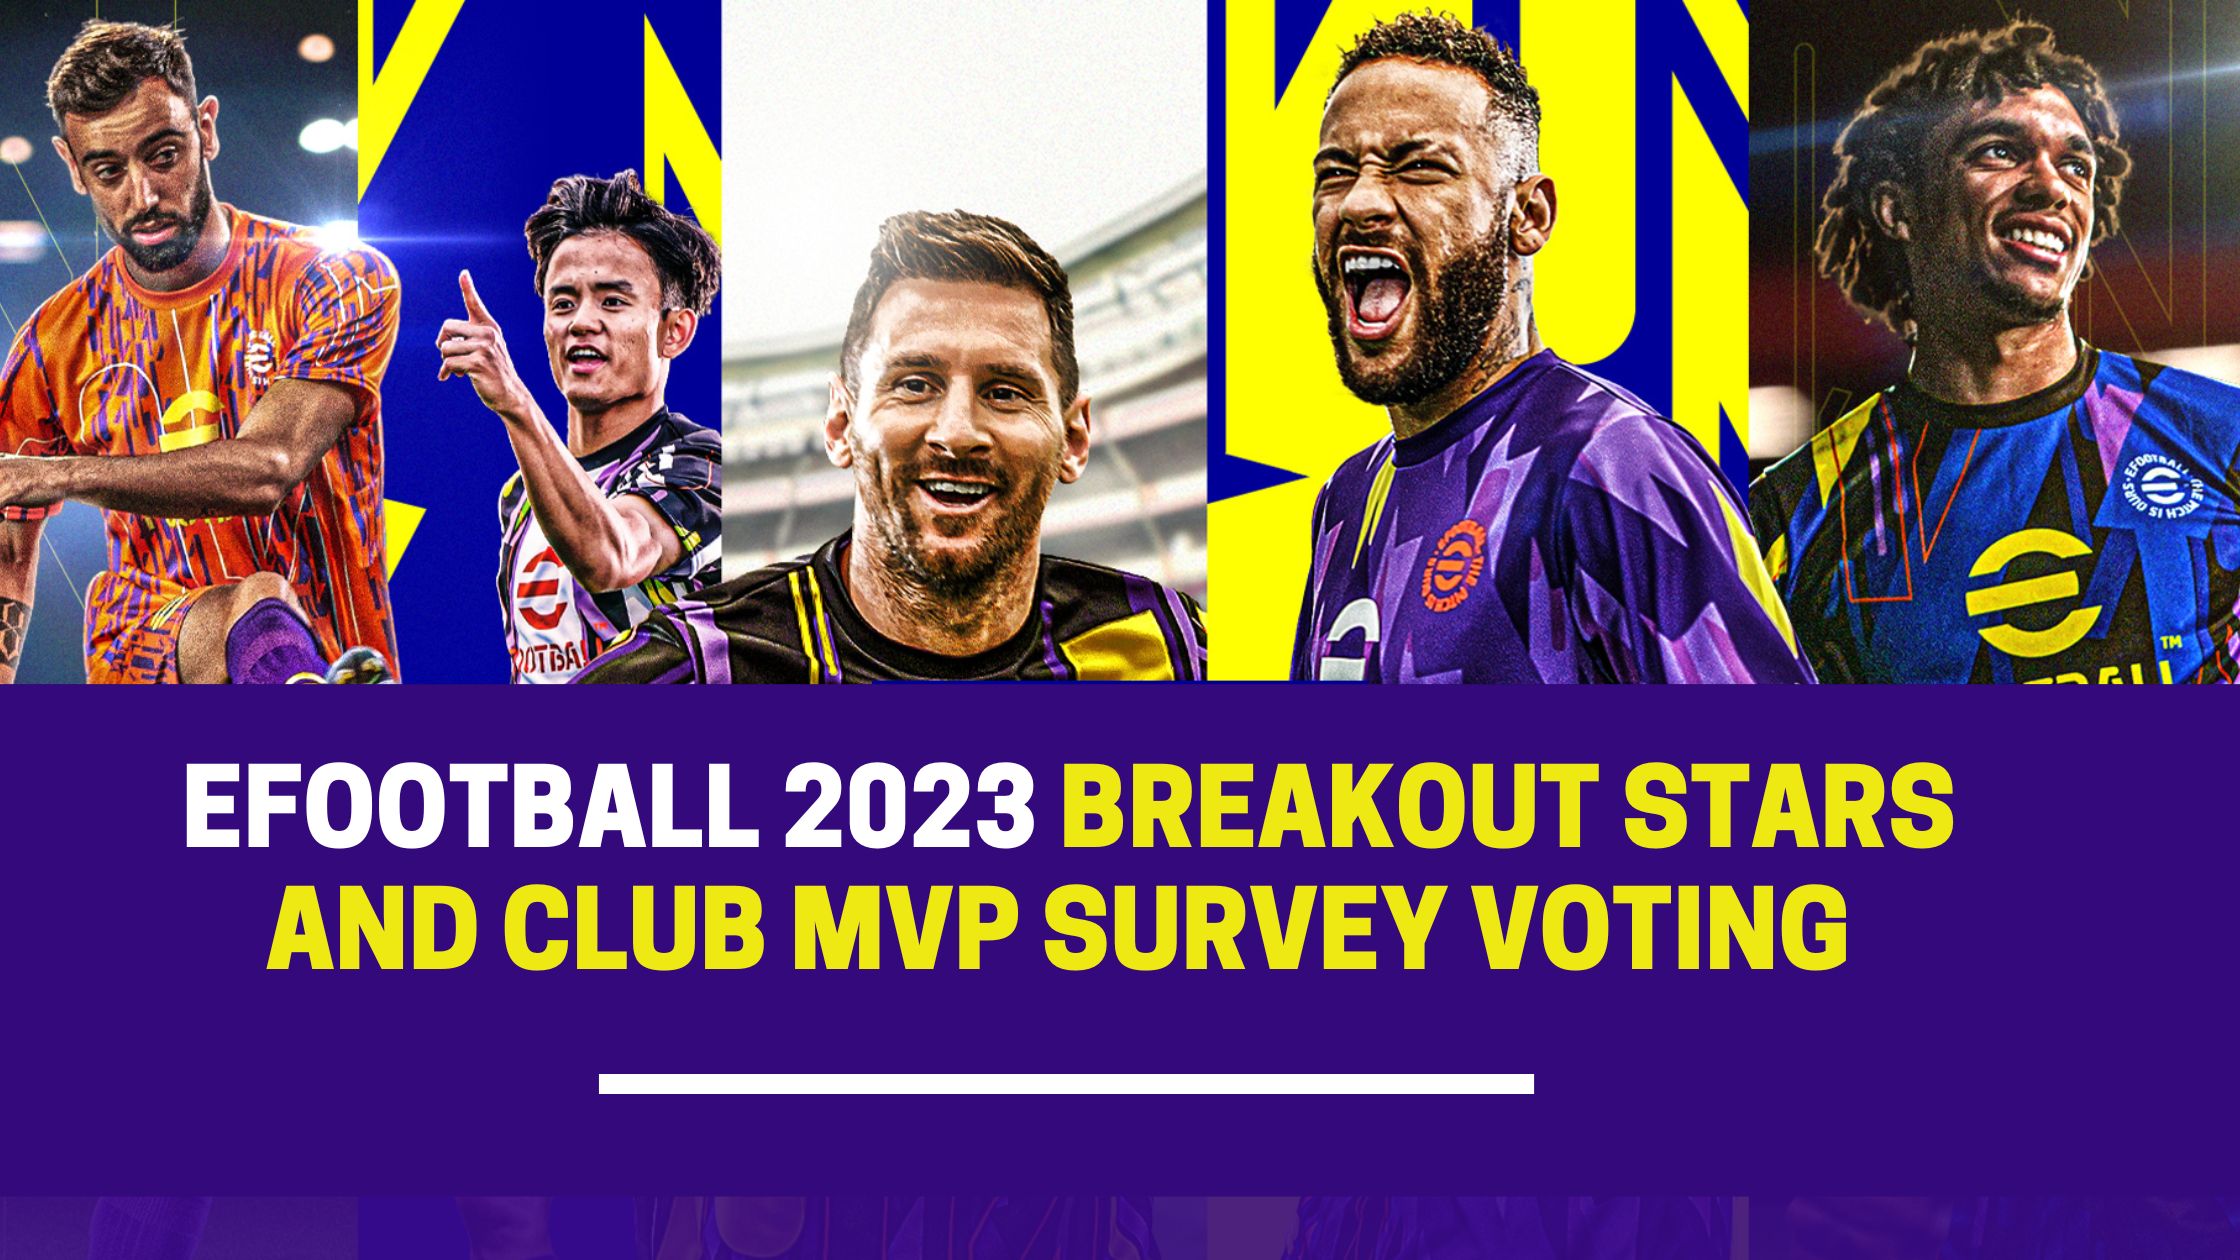 "English League" Club MVP and 2023 Breakout Stars "Asian Player" Survey in eFootball 2023